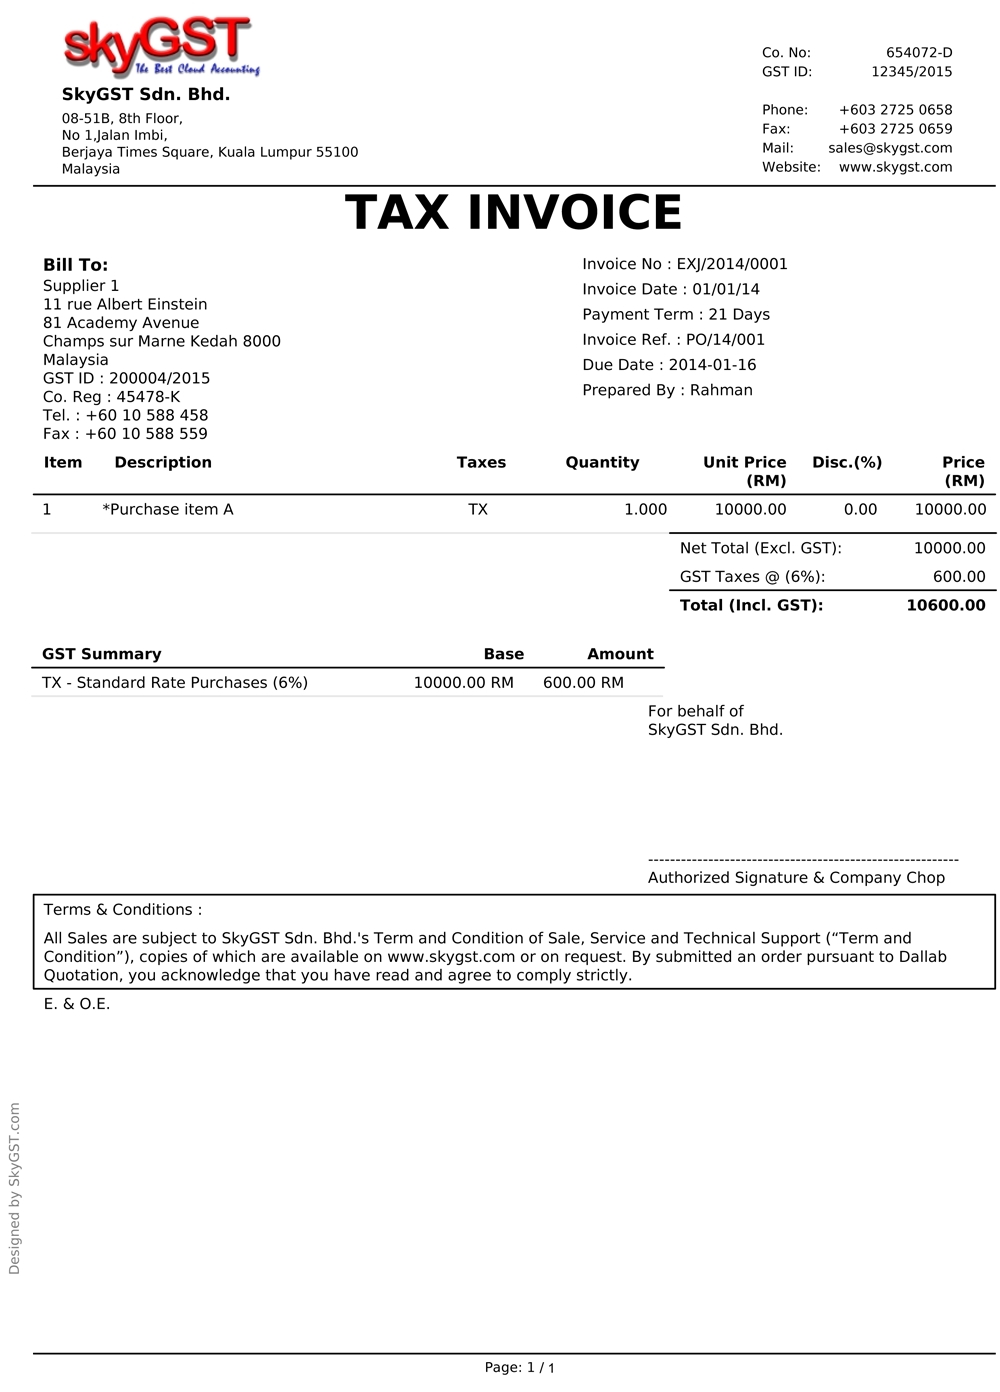 gst tax invoice template invoice template ideas examples of tax invoices